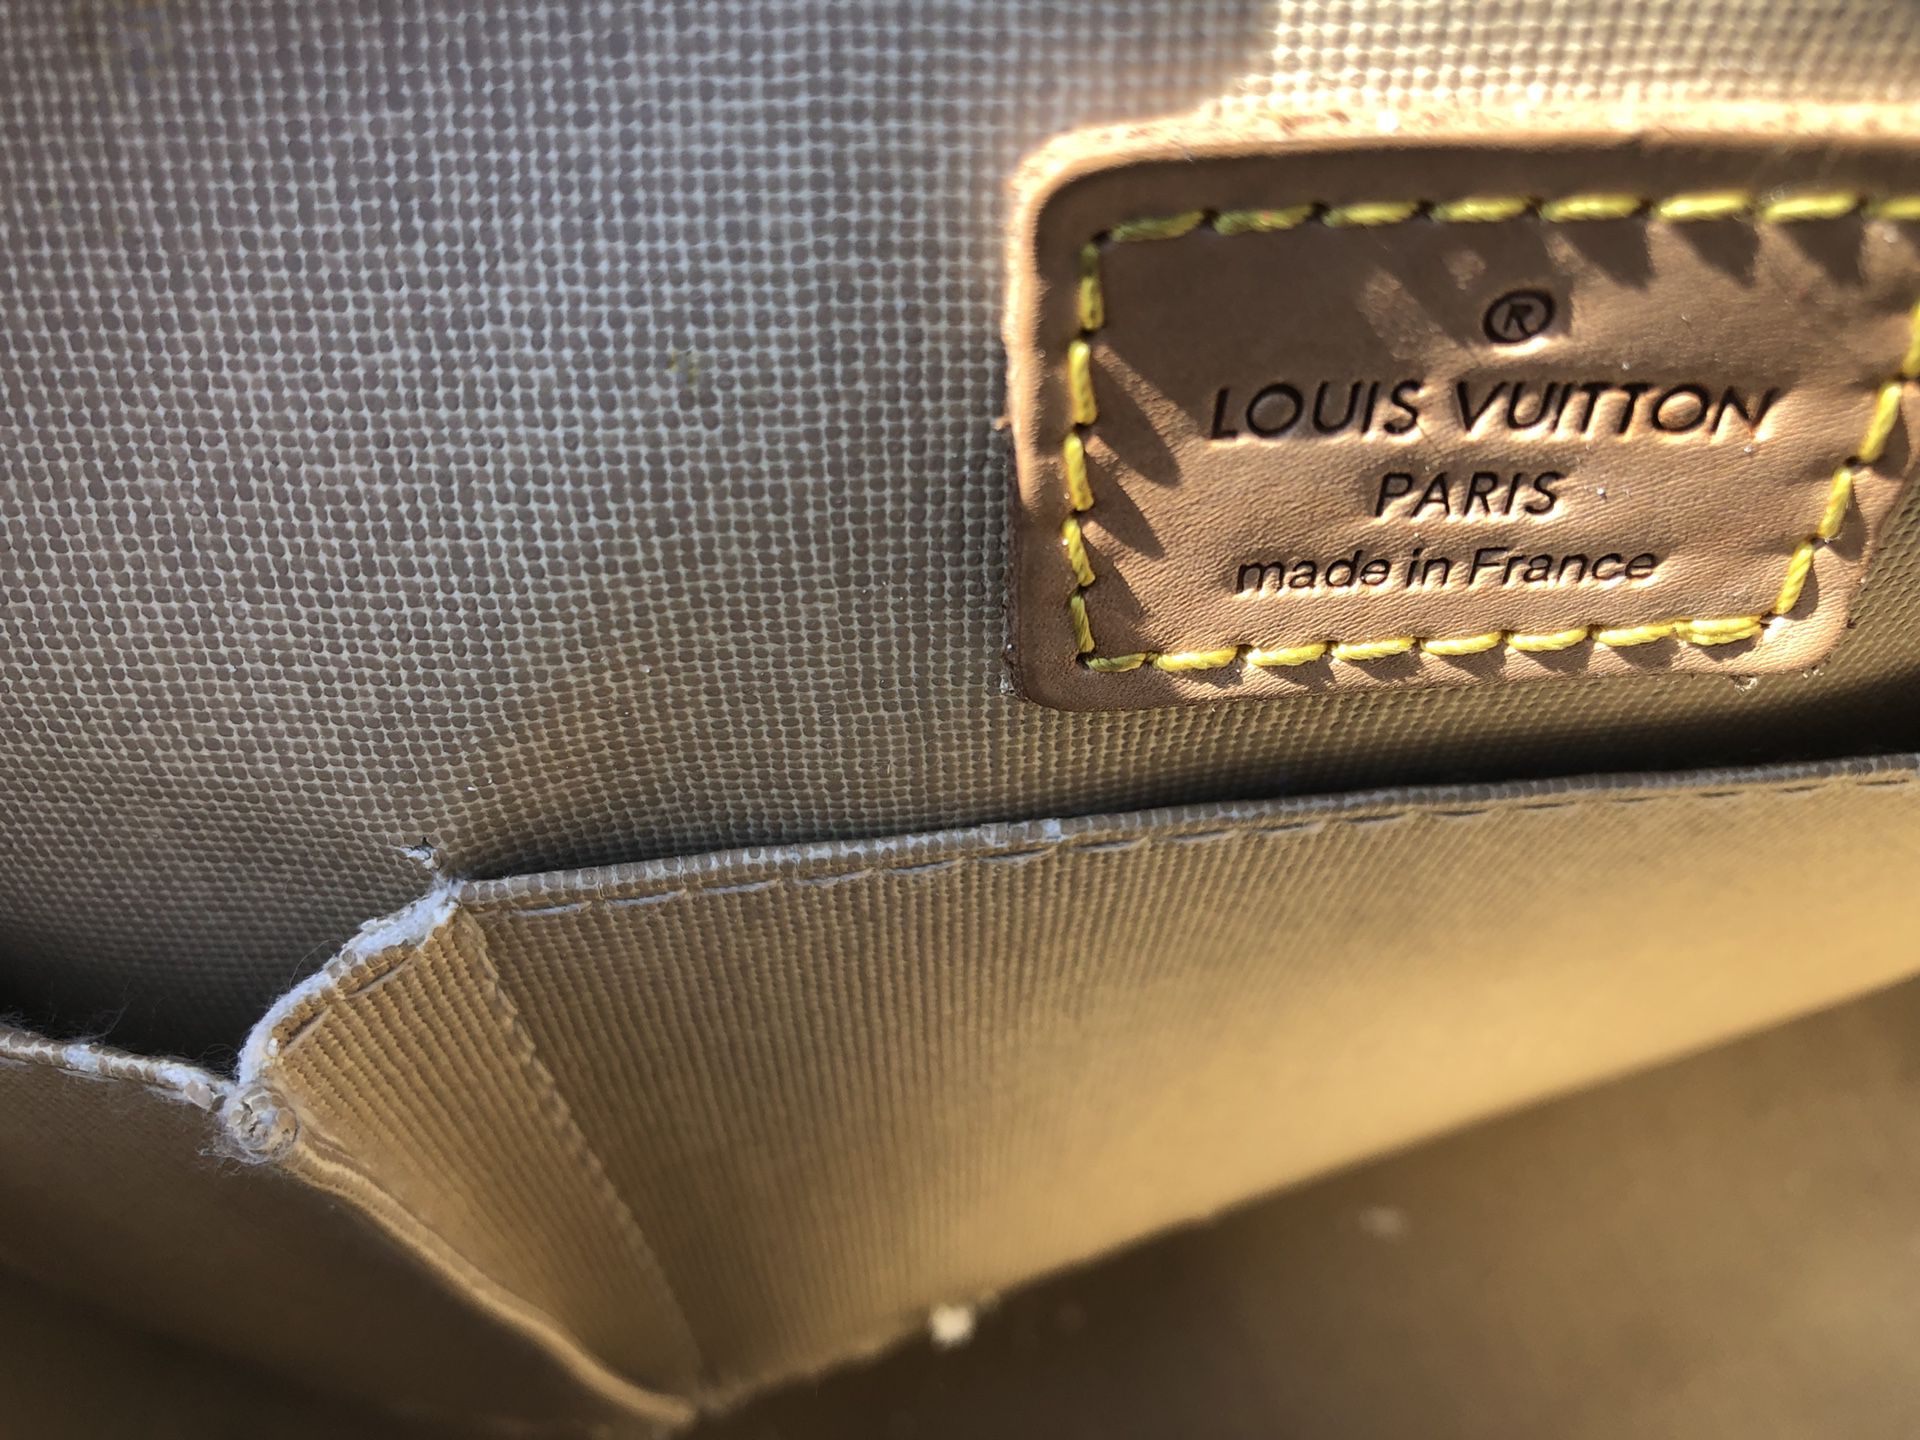 where to find serial number on louis vuitton bag